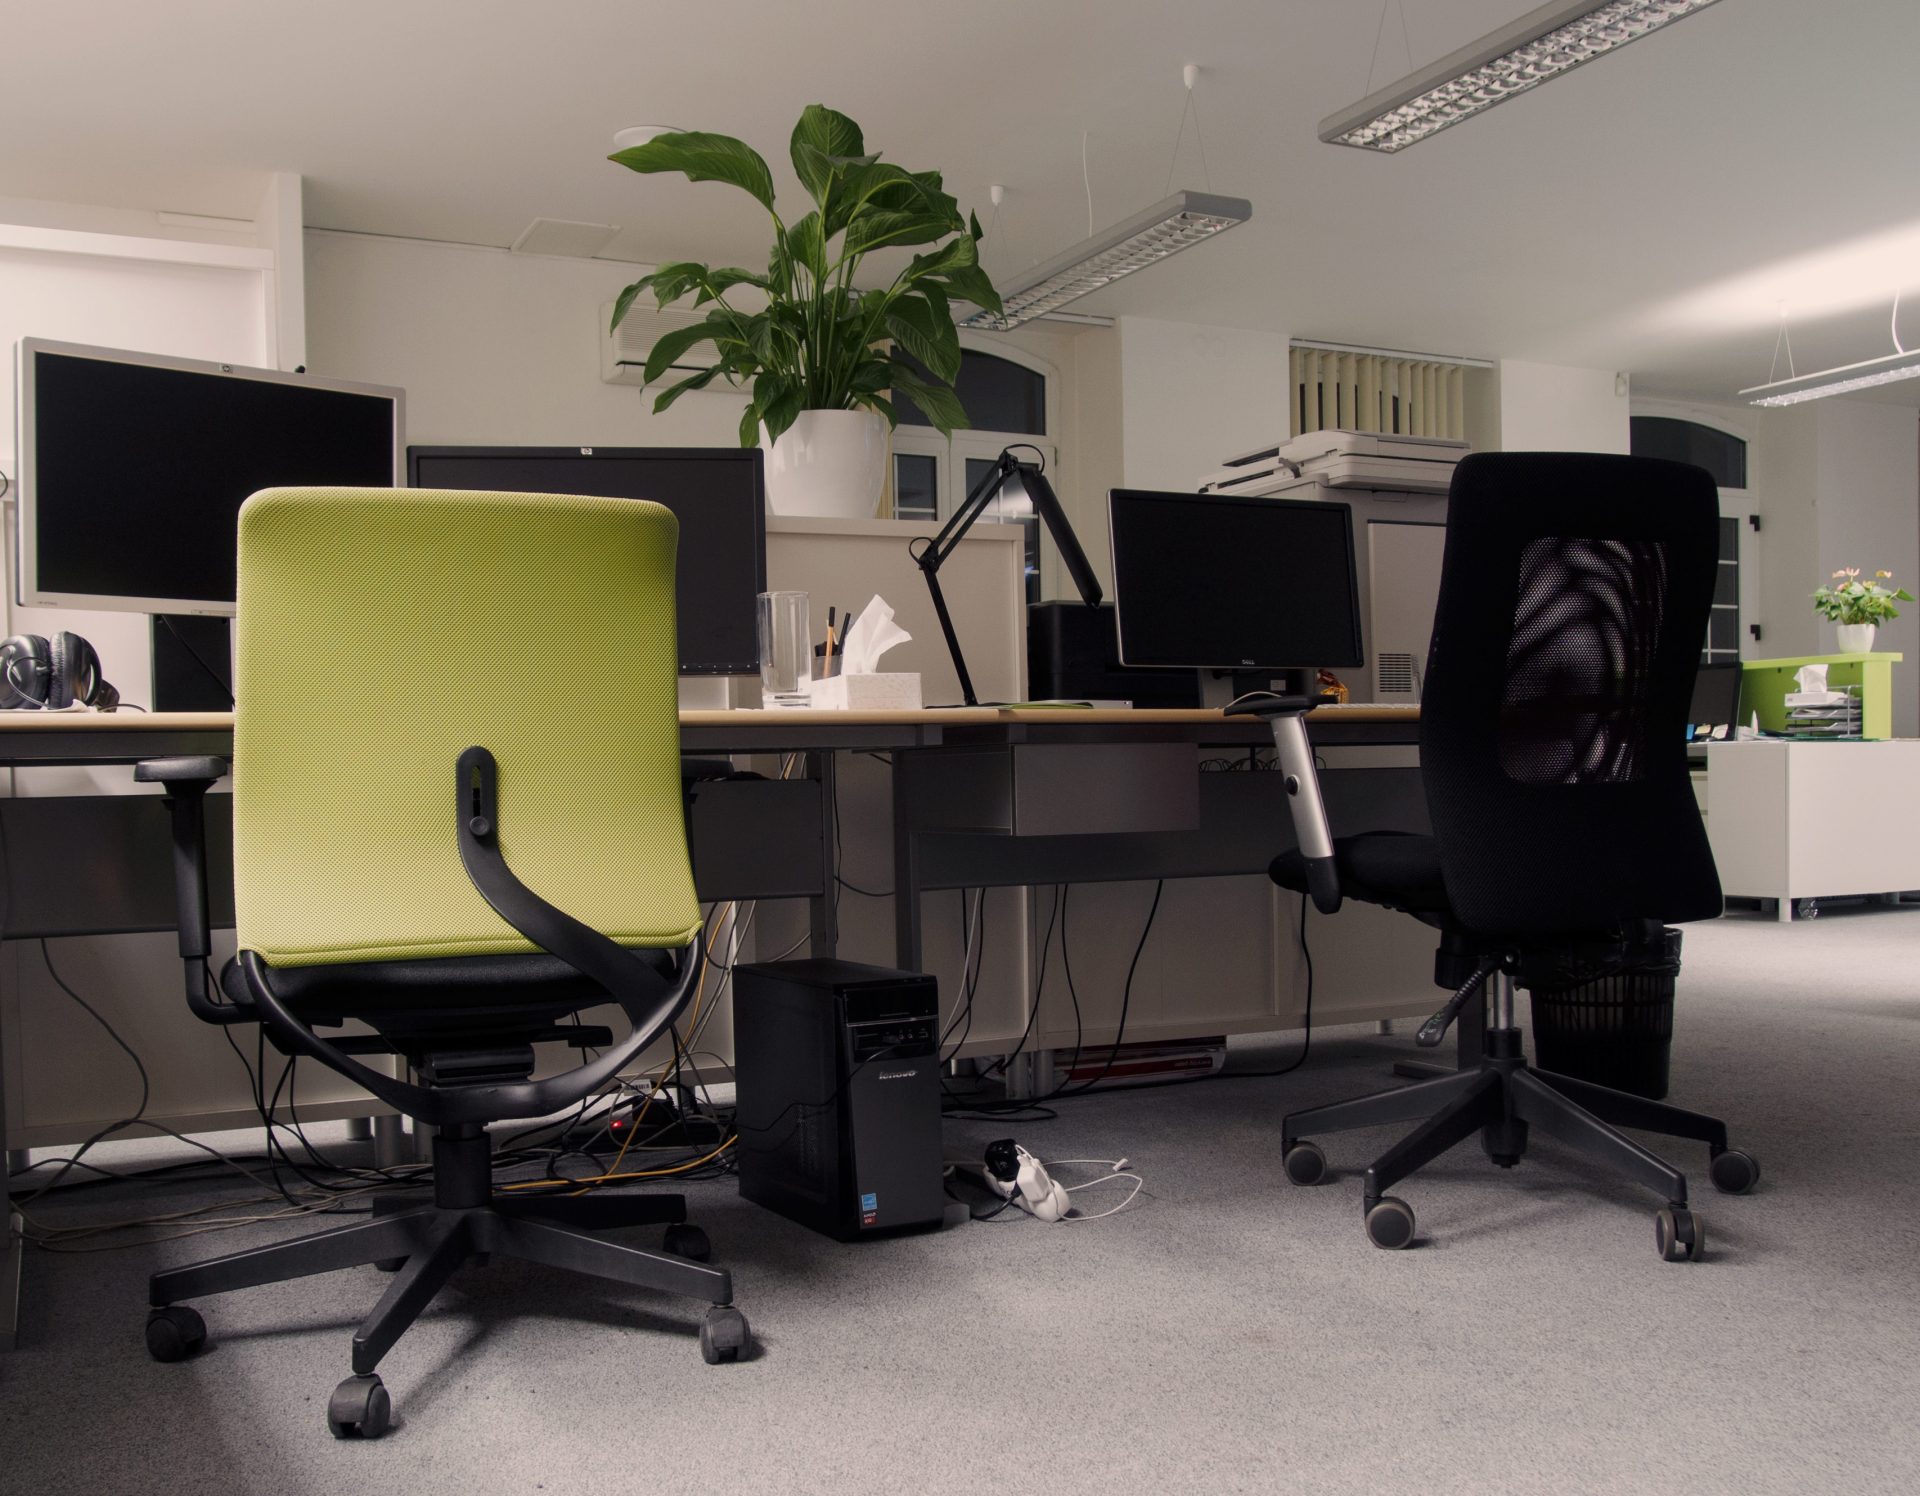 Top 5 Things to Improve Your Office Interiors